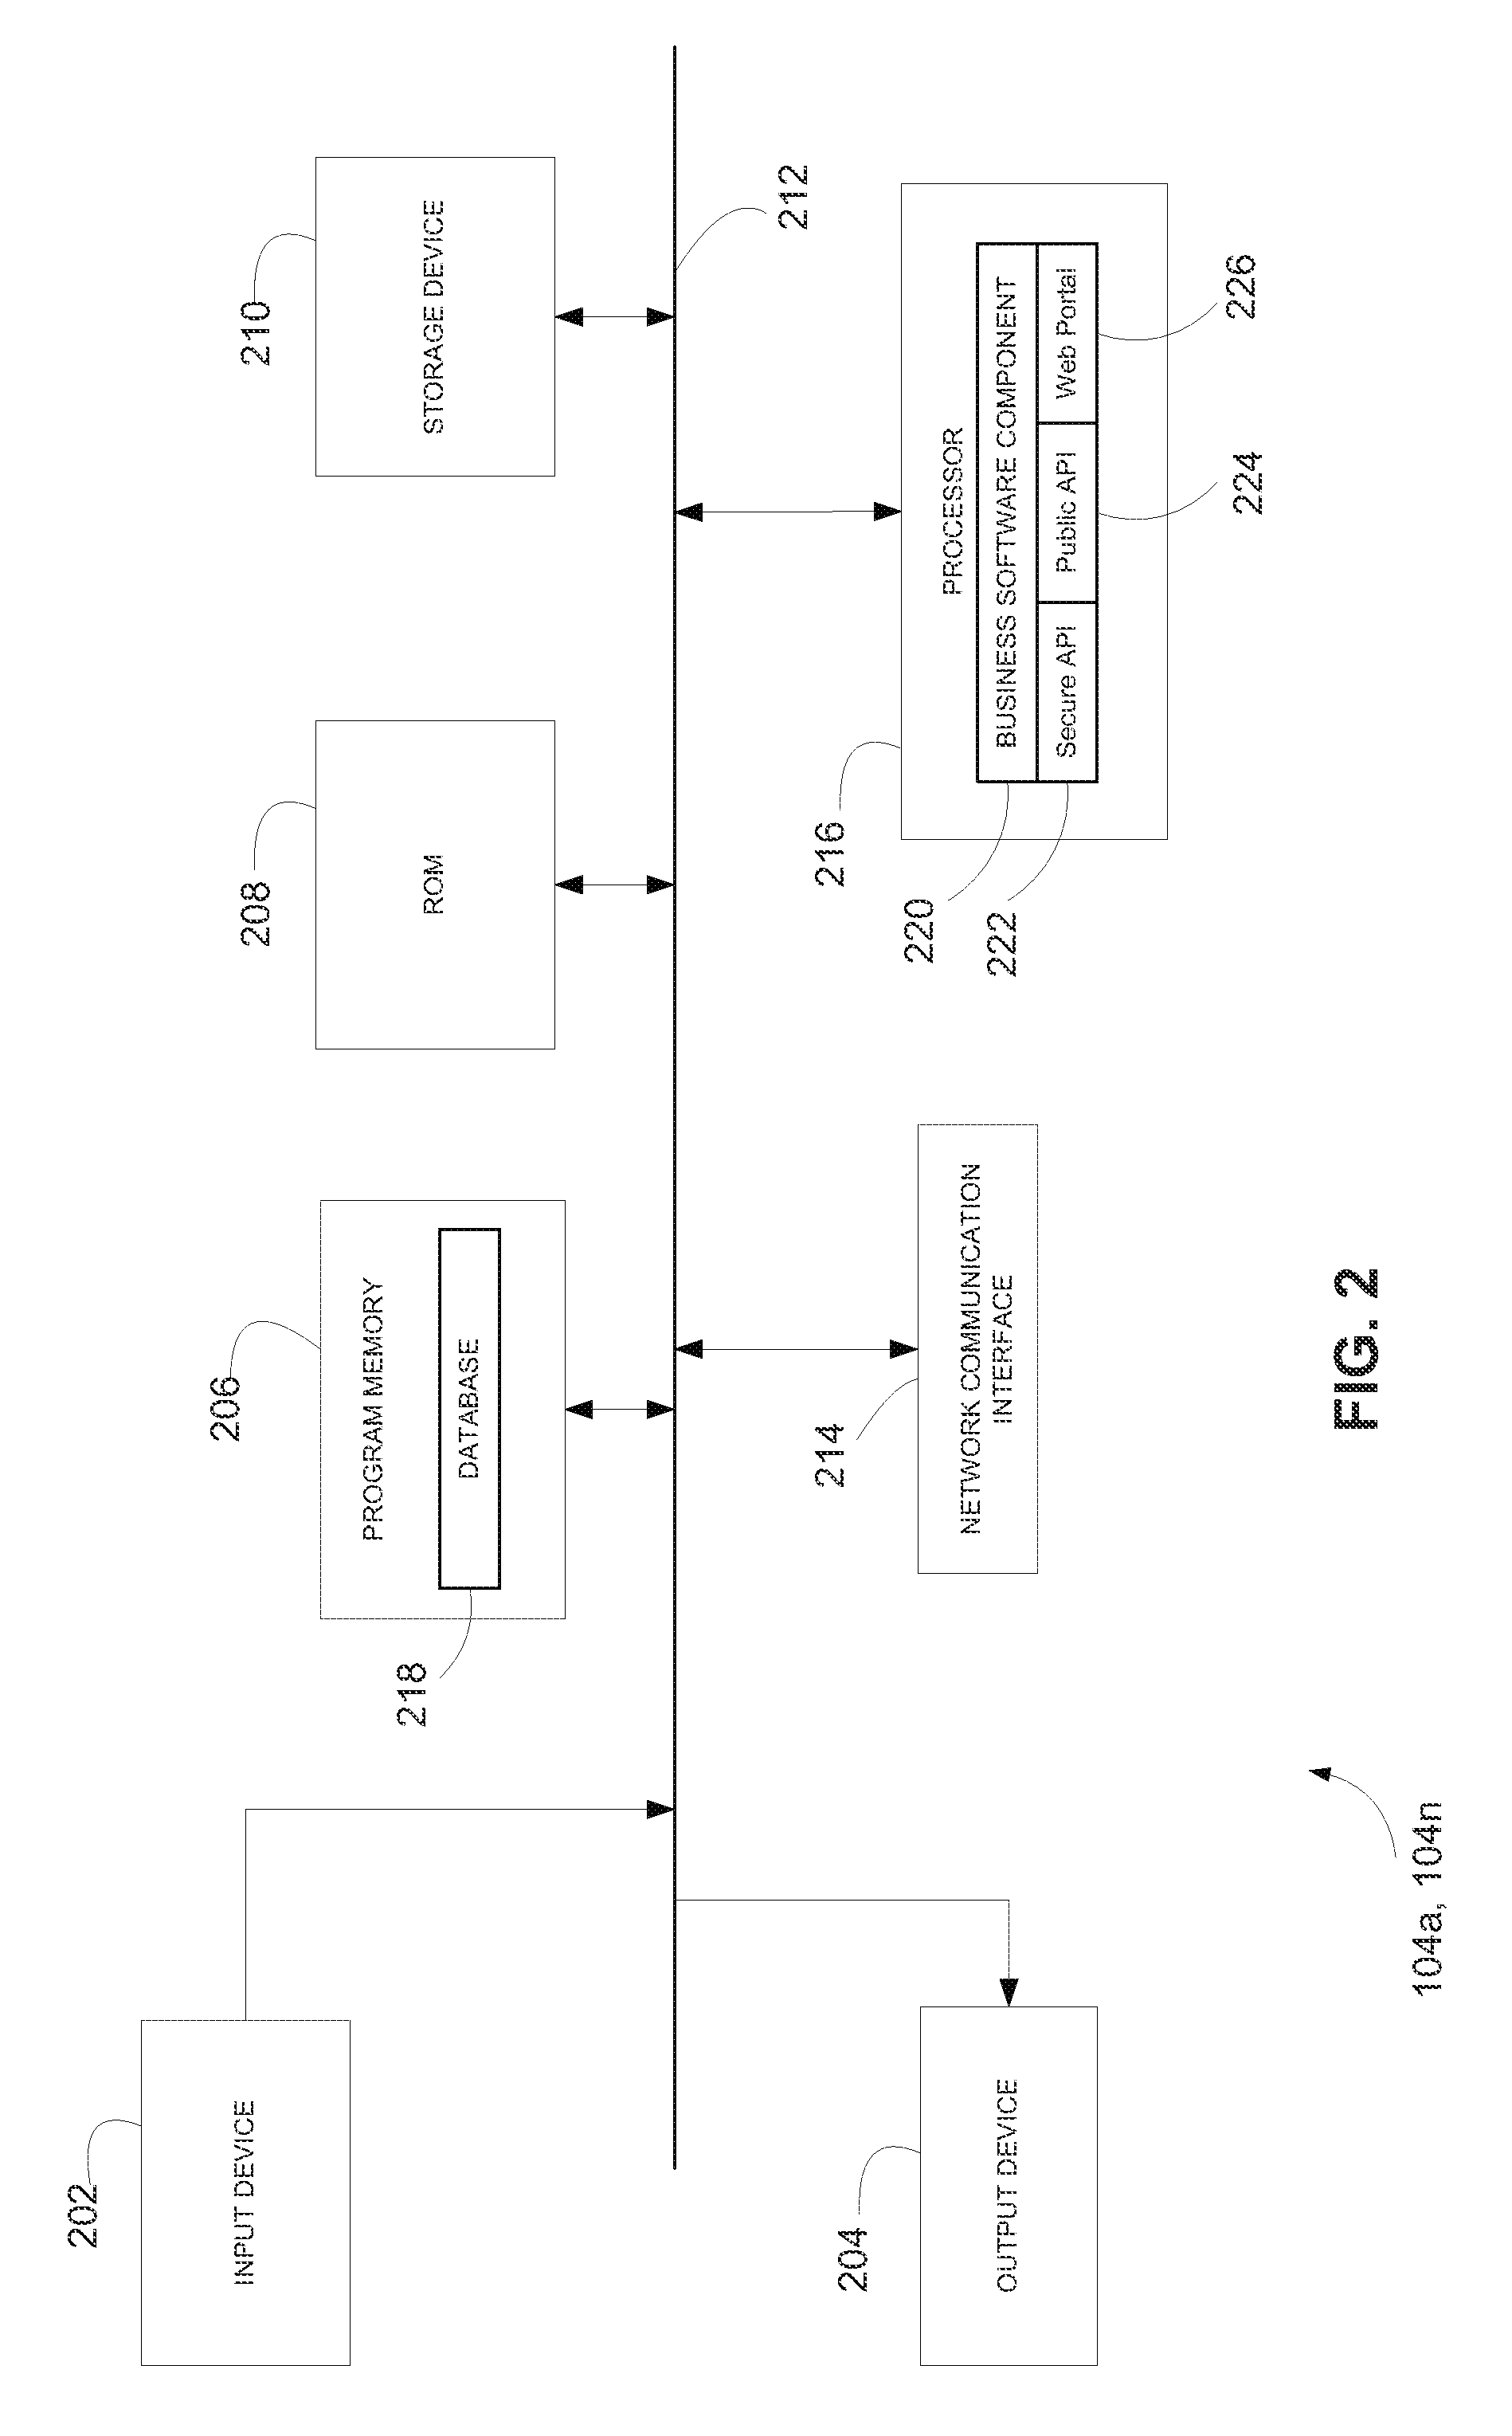 Method and systems for generating and using tokens in a transaction handling system